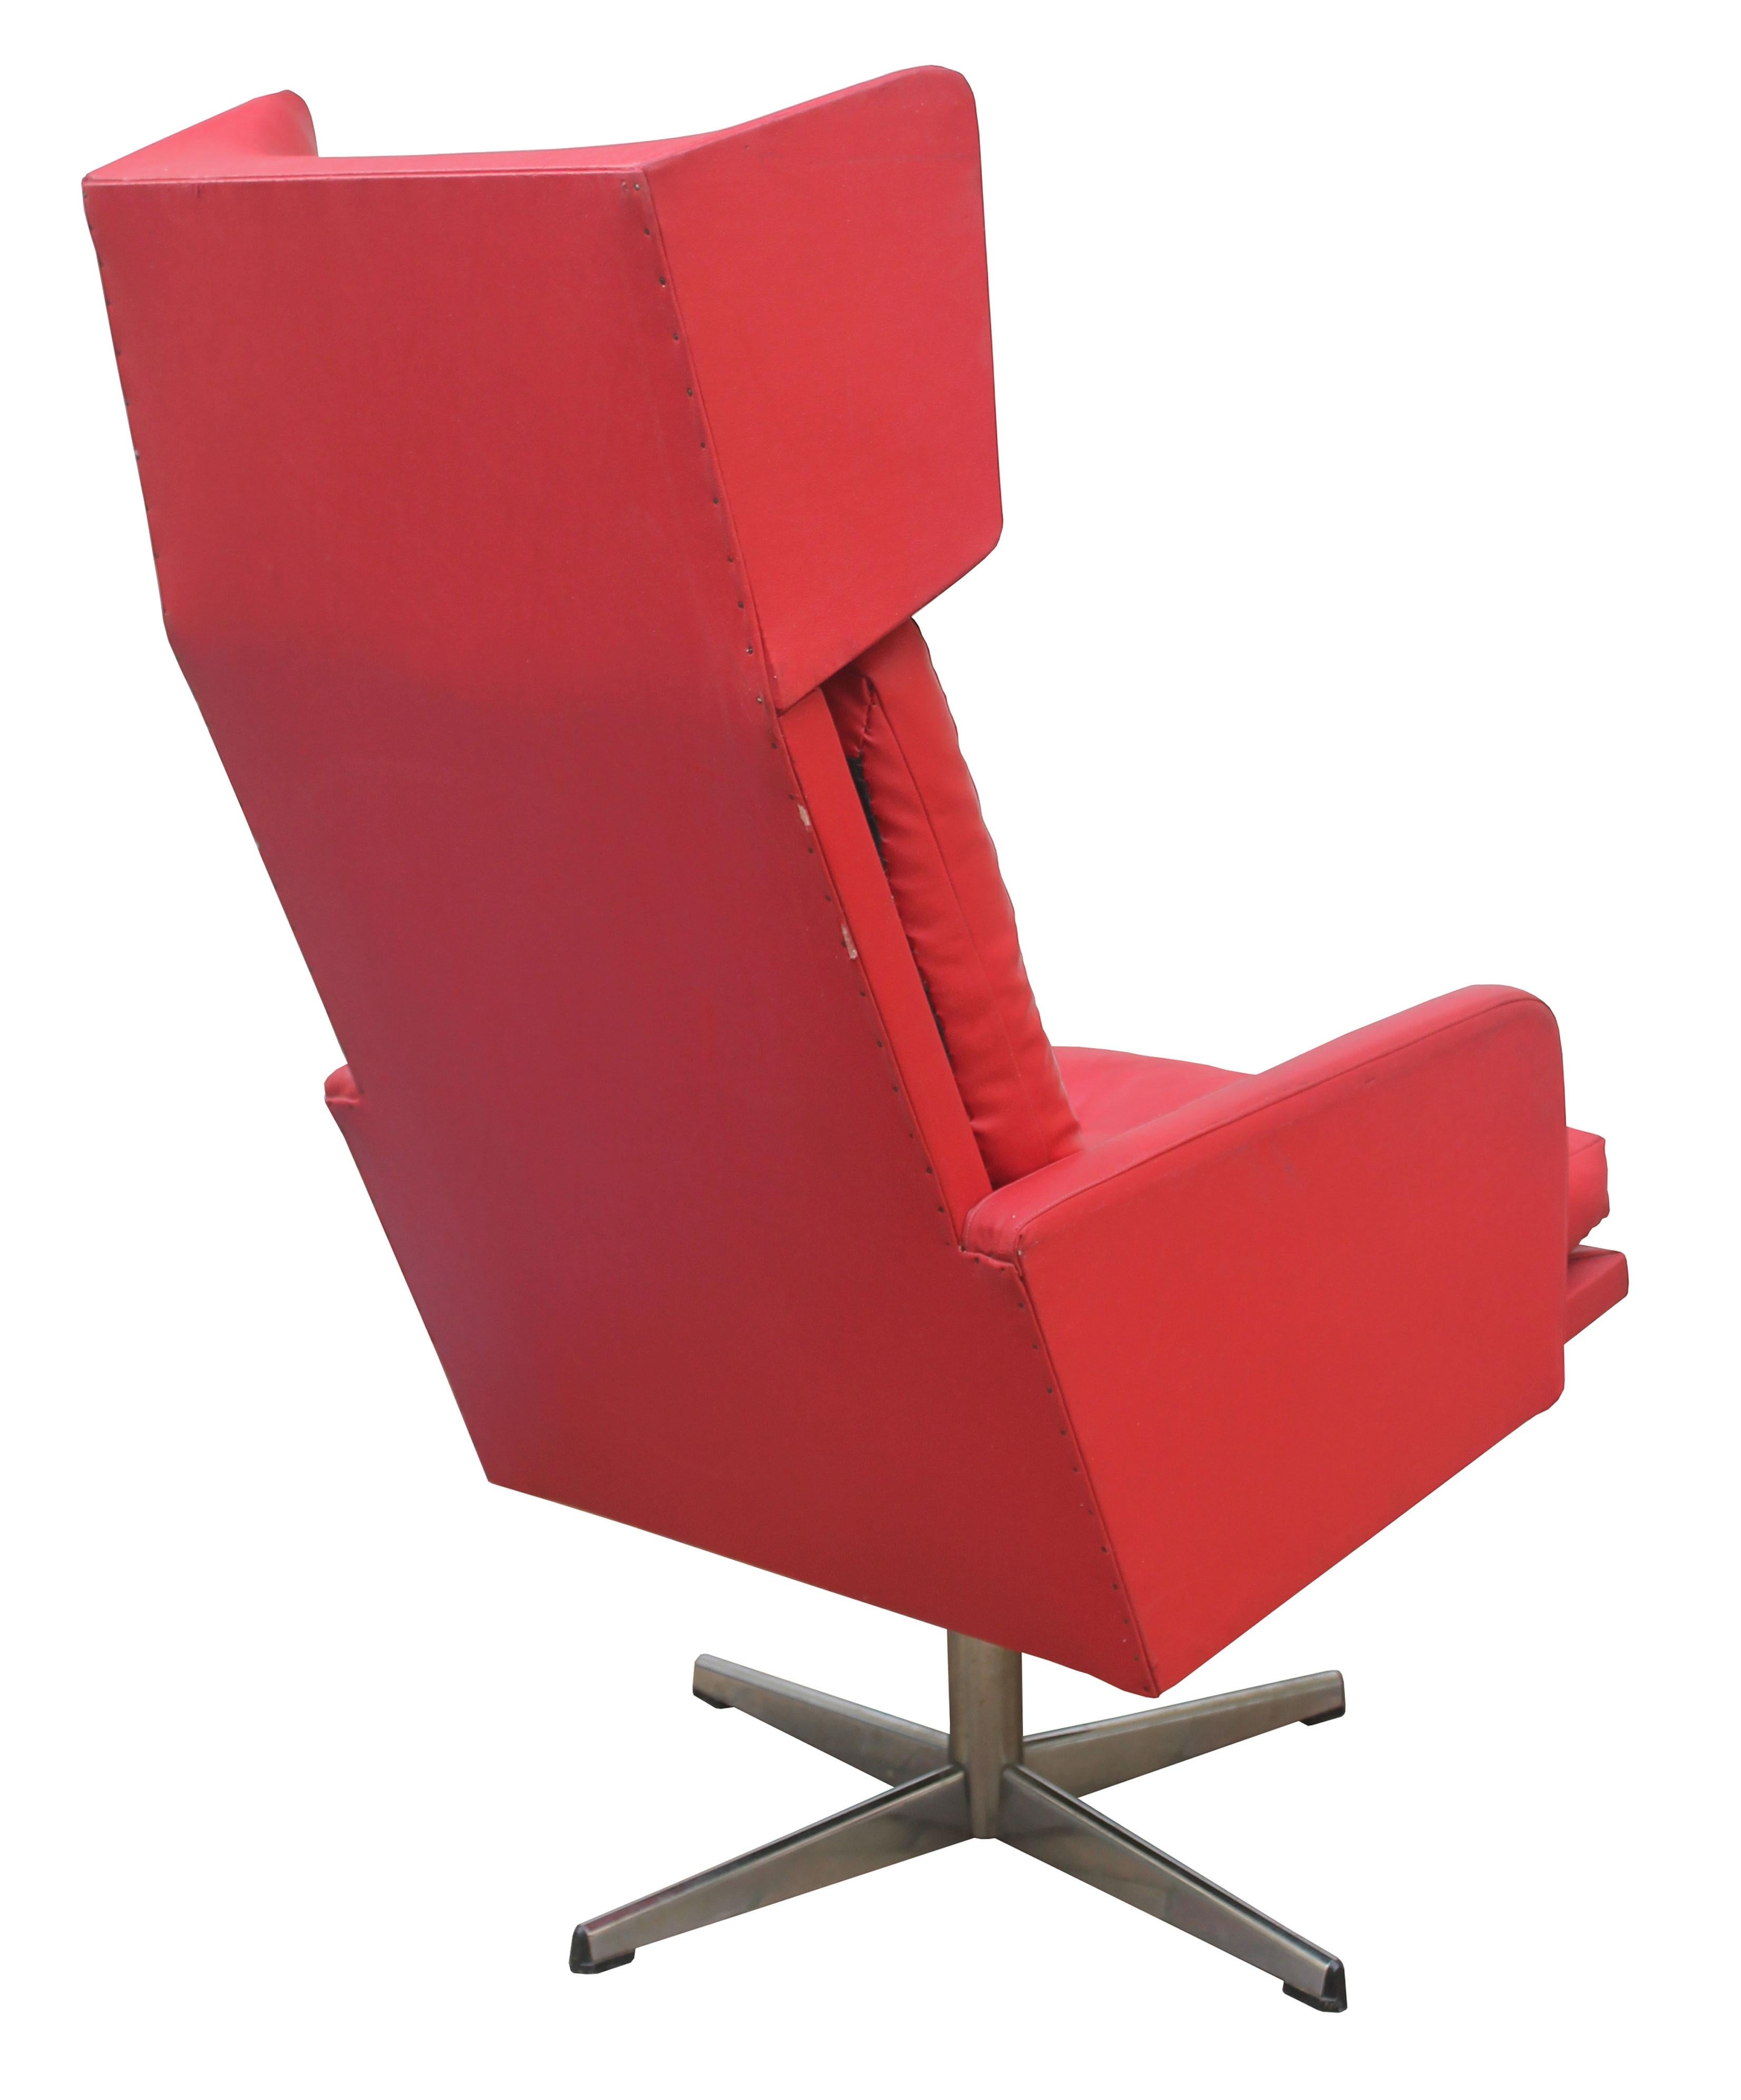 Steel 1970s Red Leather Swivel Armchair For Sale